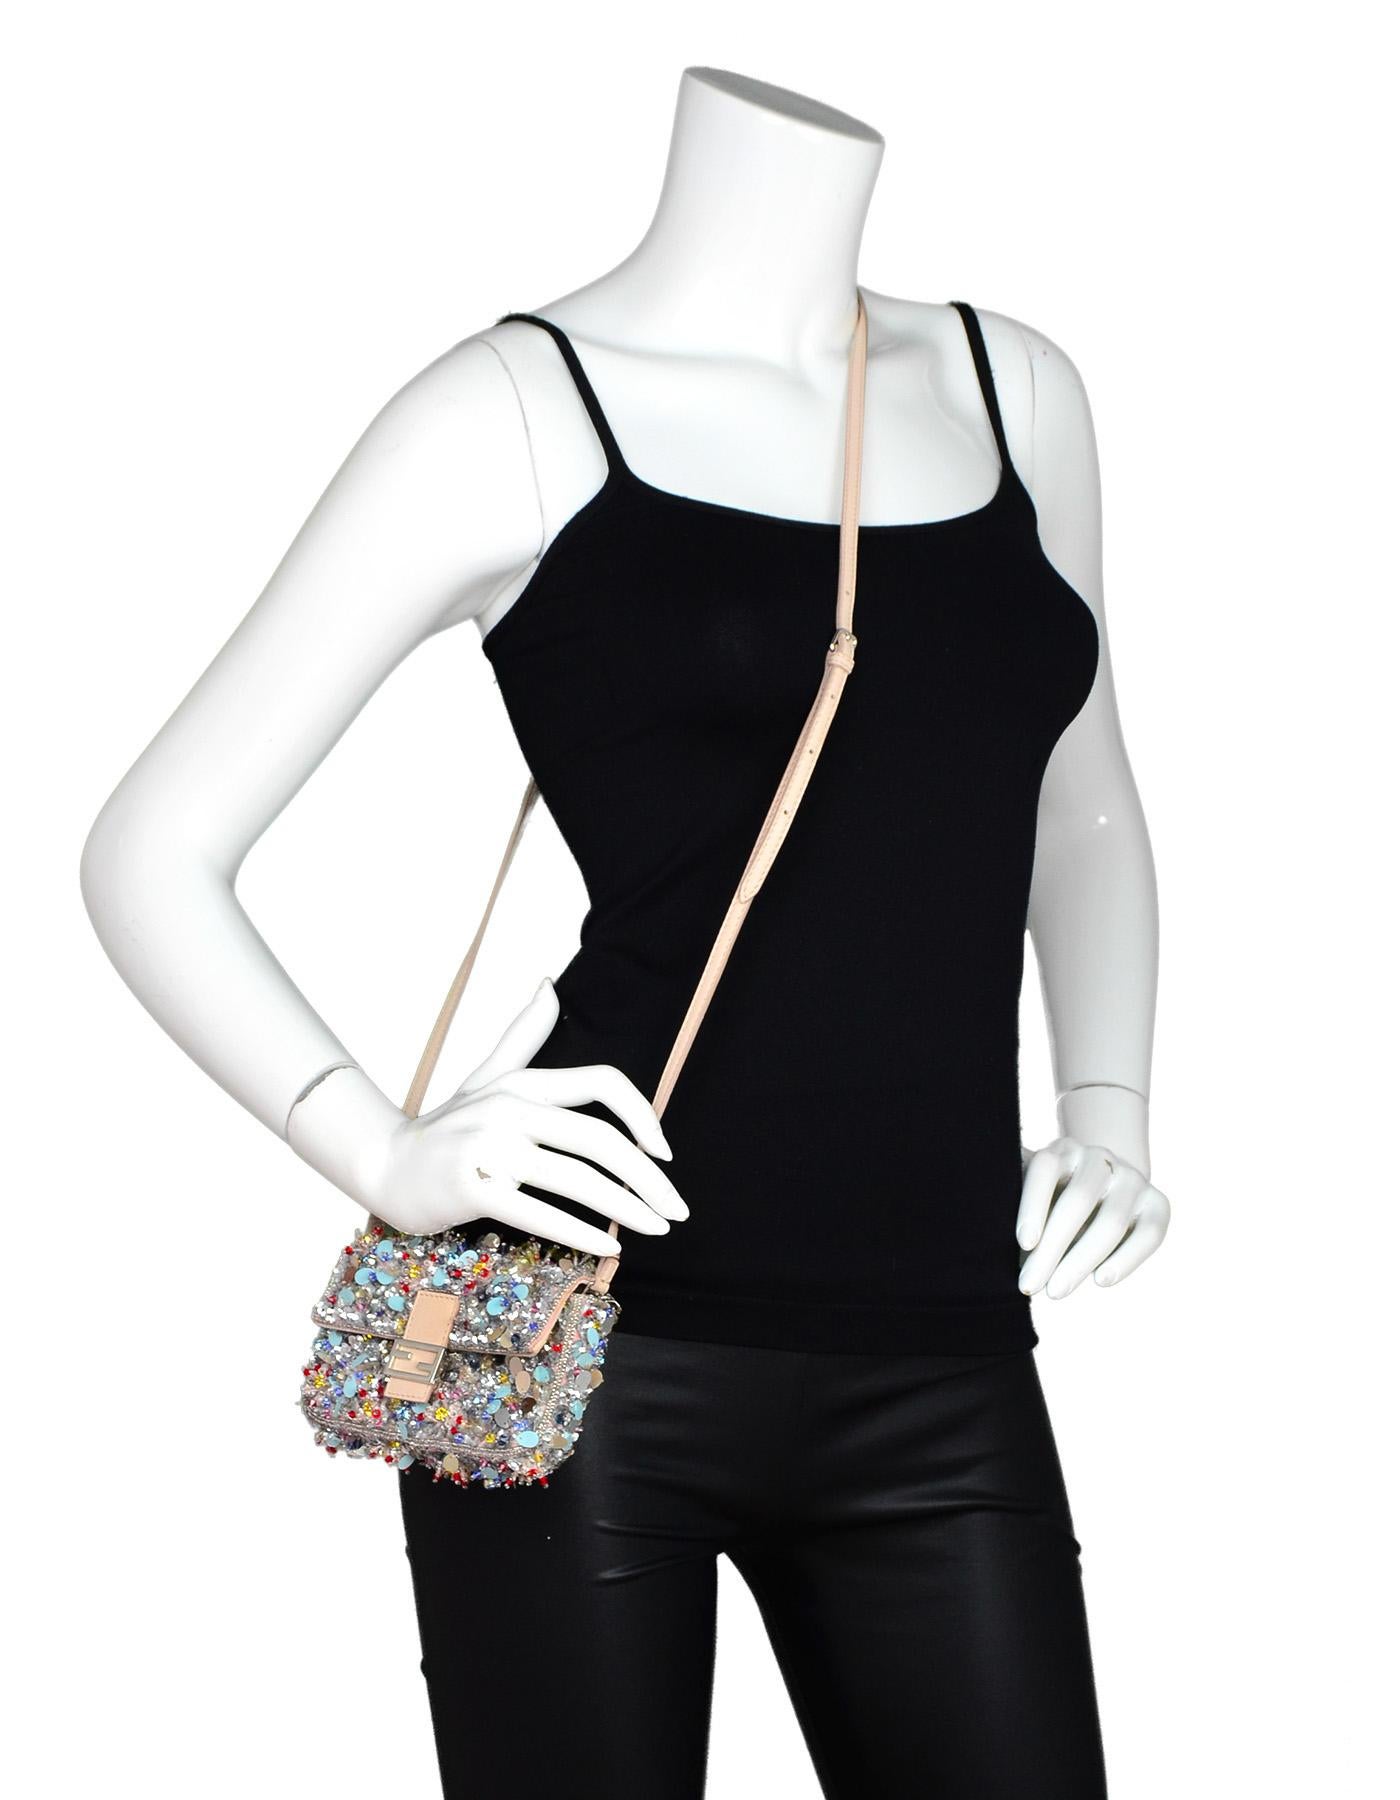 Fendi Beaded Sequin Blush Micro Baguette Crossbody Bag W/ Dust Bag

Made In: Italy
Color: Blush and multi-color
Hardware: Silvertone
Materials: Beaded, sequin, leather, and metal
Lining: Pink suede 
Closure/Opening: Flap top w/ FF logo magnetic